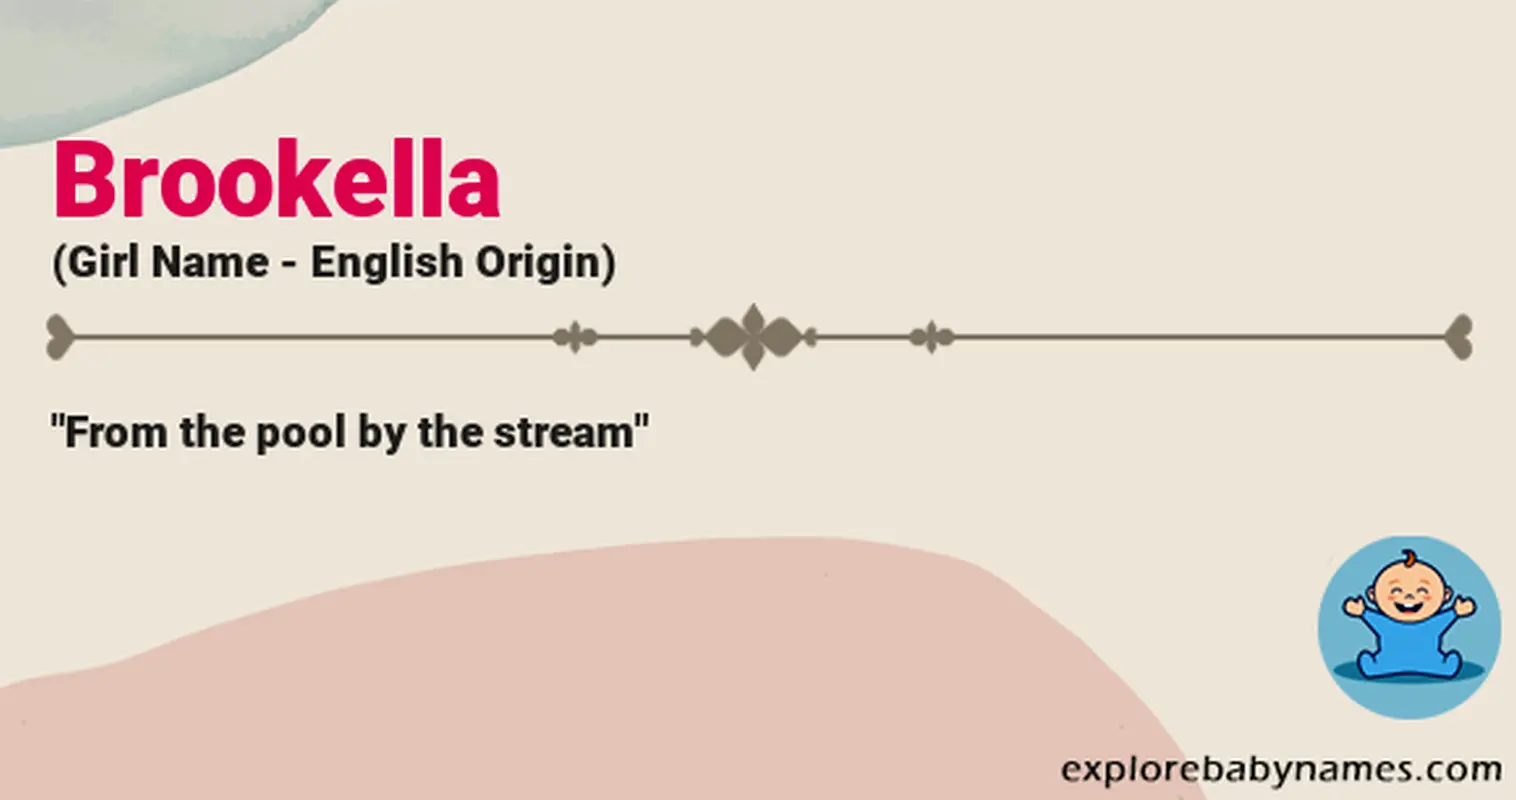 Meaning of Brookella